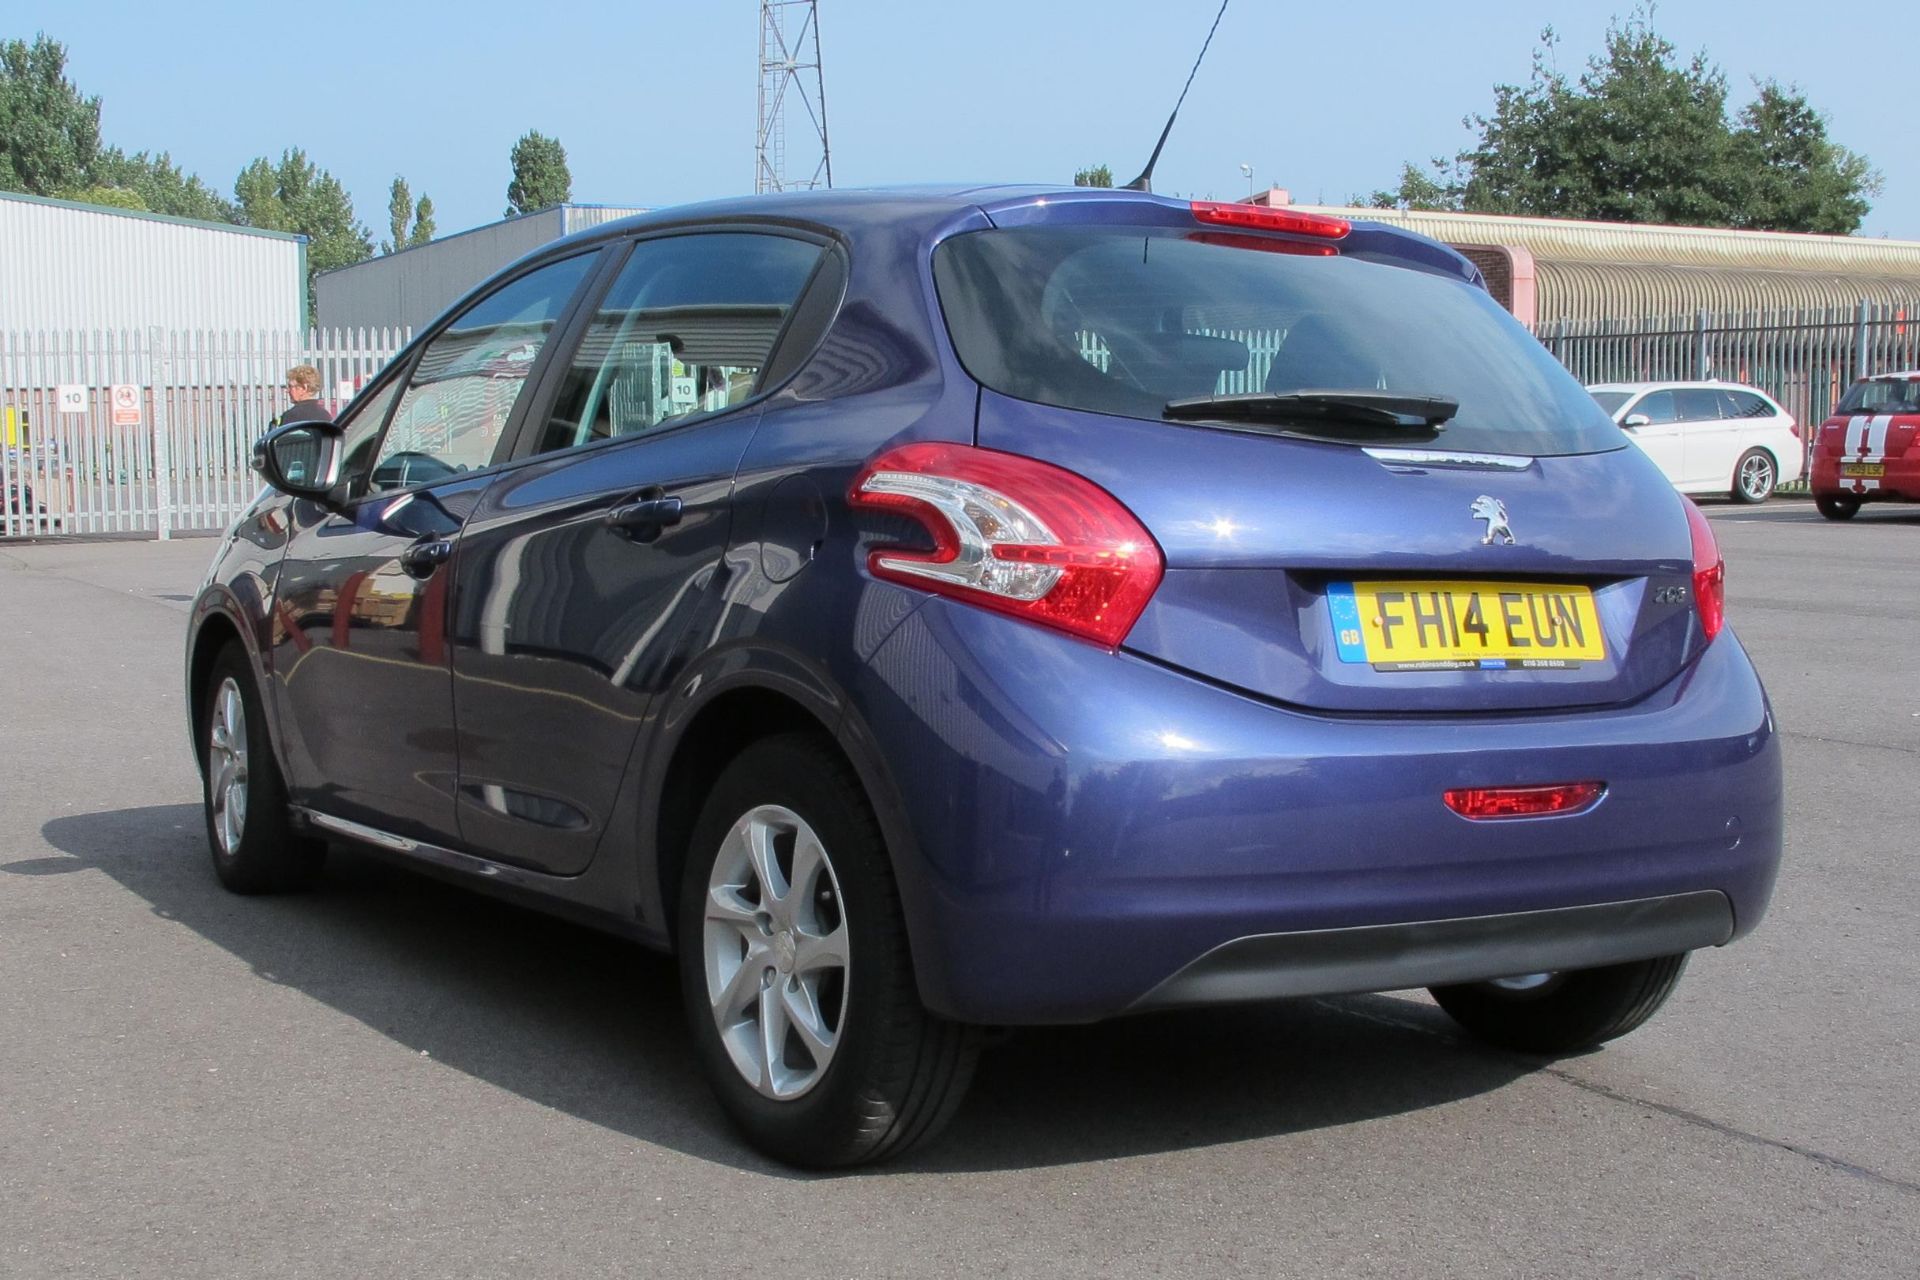 Peugeot 208 Active HDI 5 door hatch. 1398cc. Full service history, Registration FH14 EUN. Odometer - Image 3 of 18